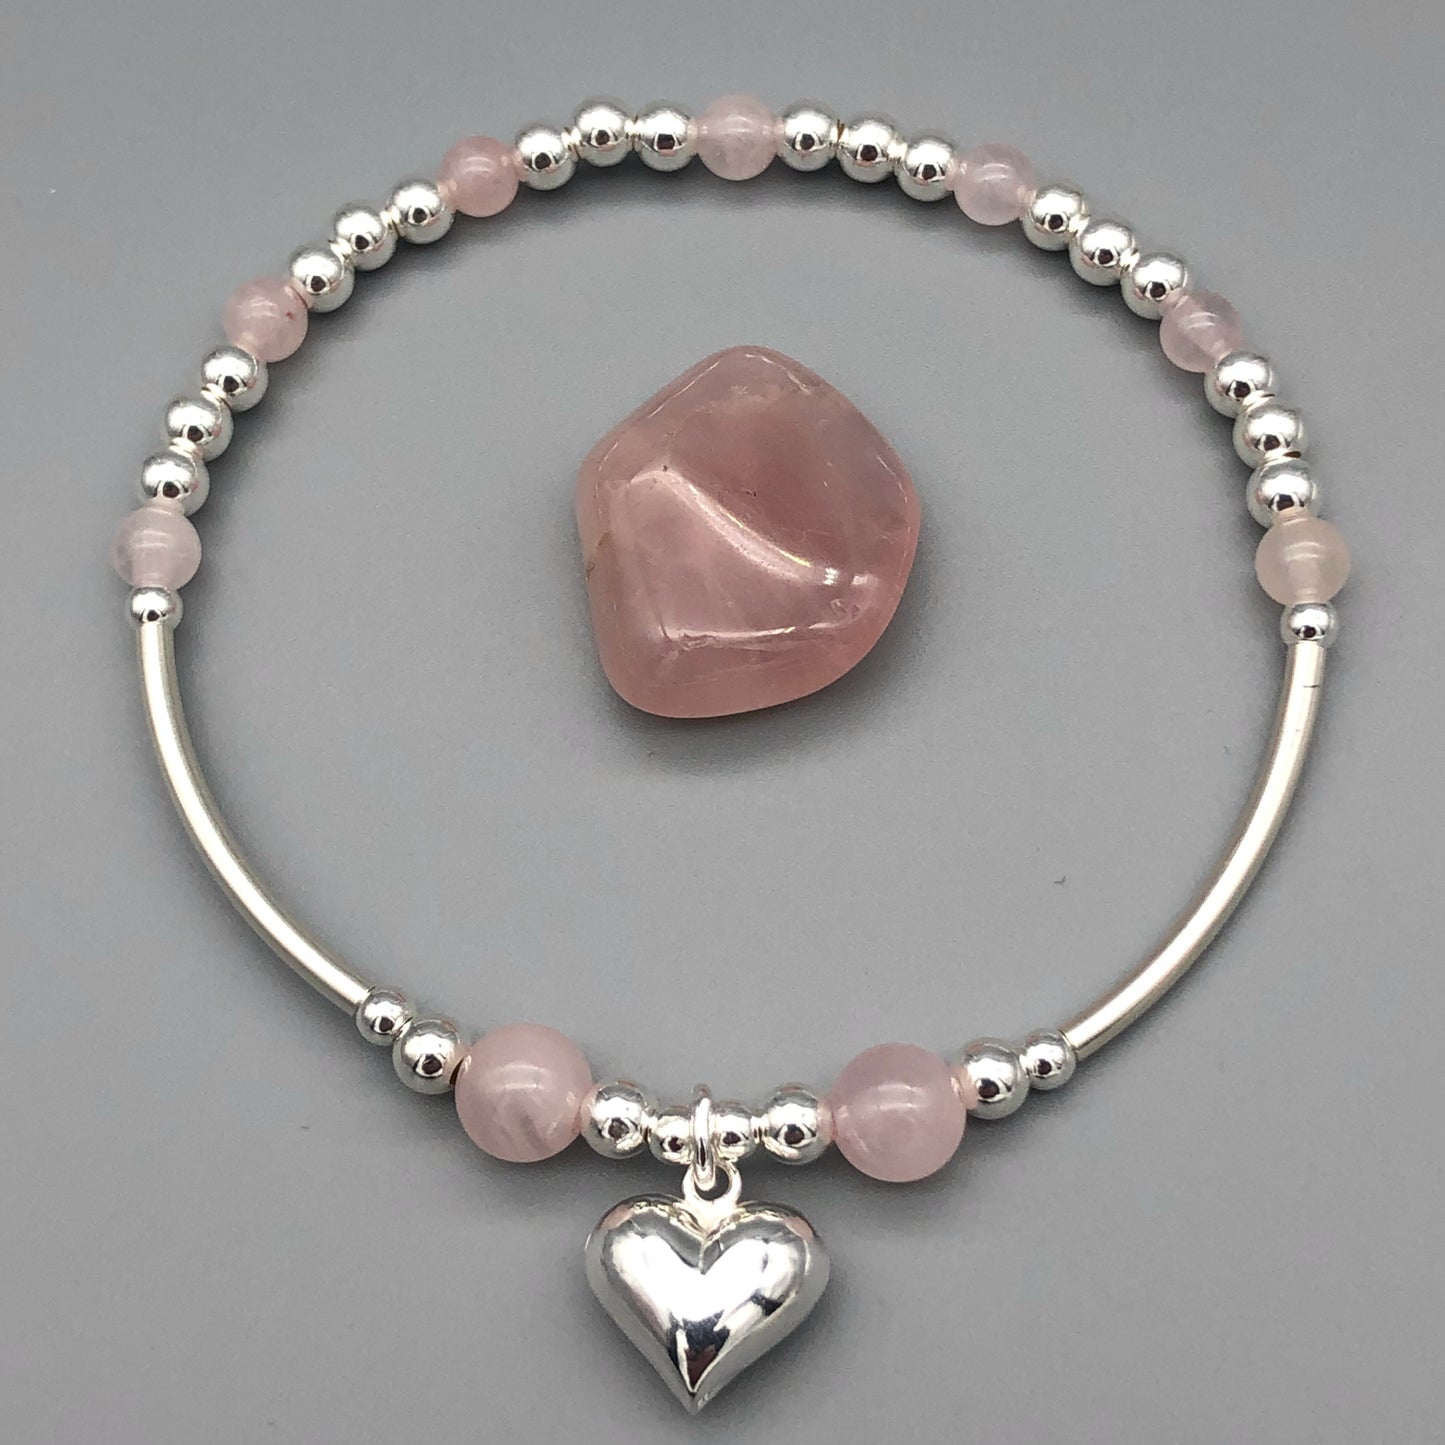 Rose quartz puff heart charm sterling silver women's stacking bracelet by My Silver Wish